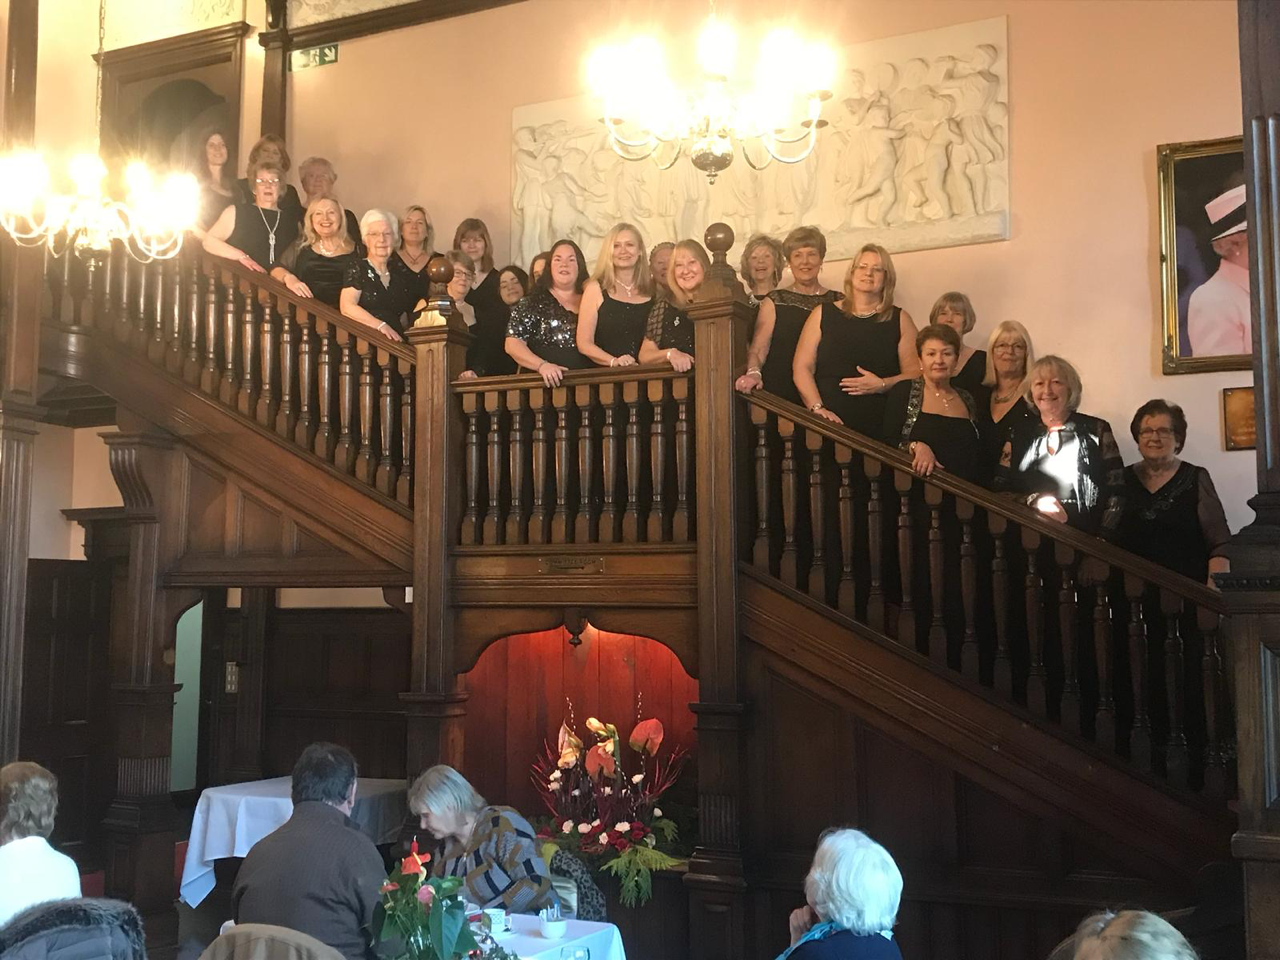 Here we are on the beautiful staircase a Reaseheath